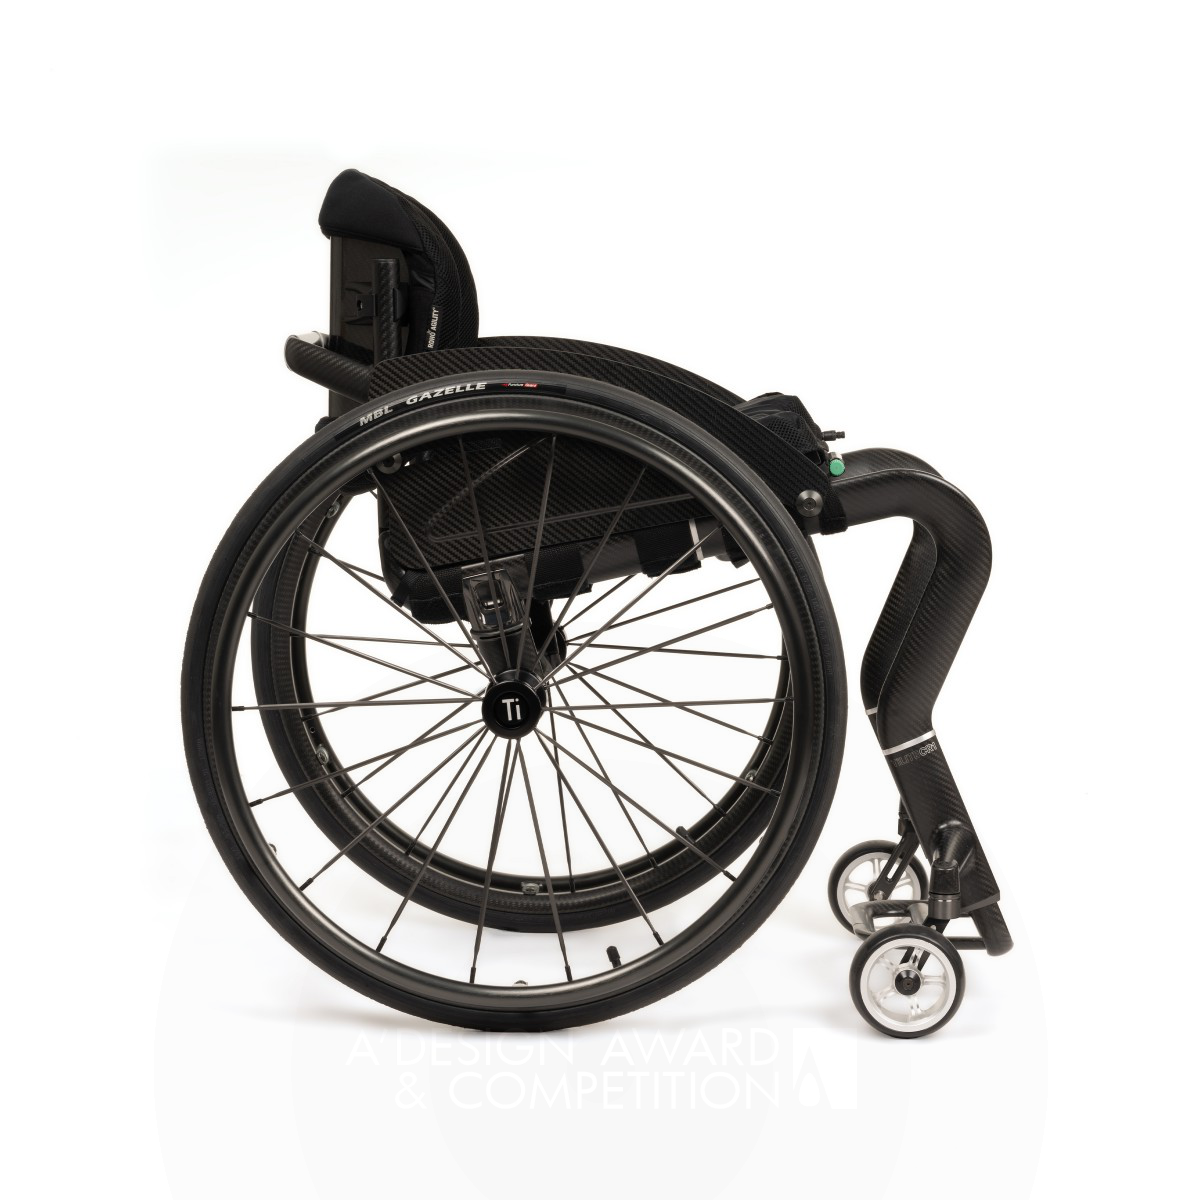 Doug Garven wins Golden at the prestigious A' Product Engineering and Technical Design Award with CR1 Wheelchair.